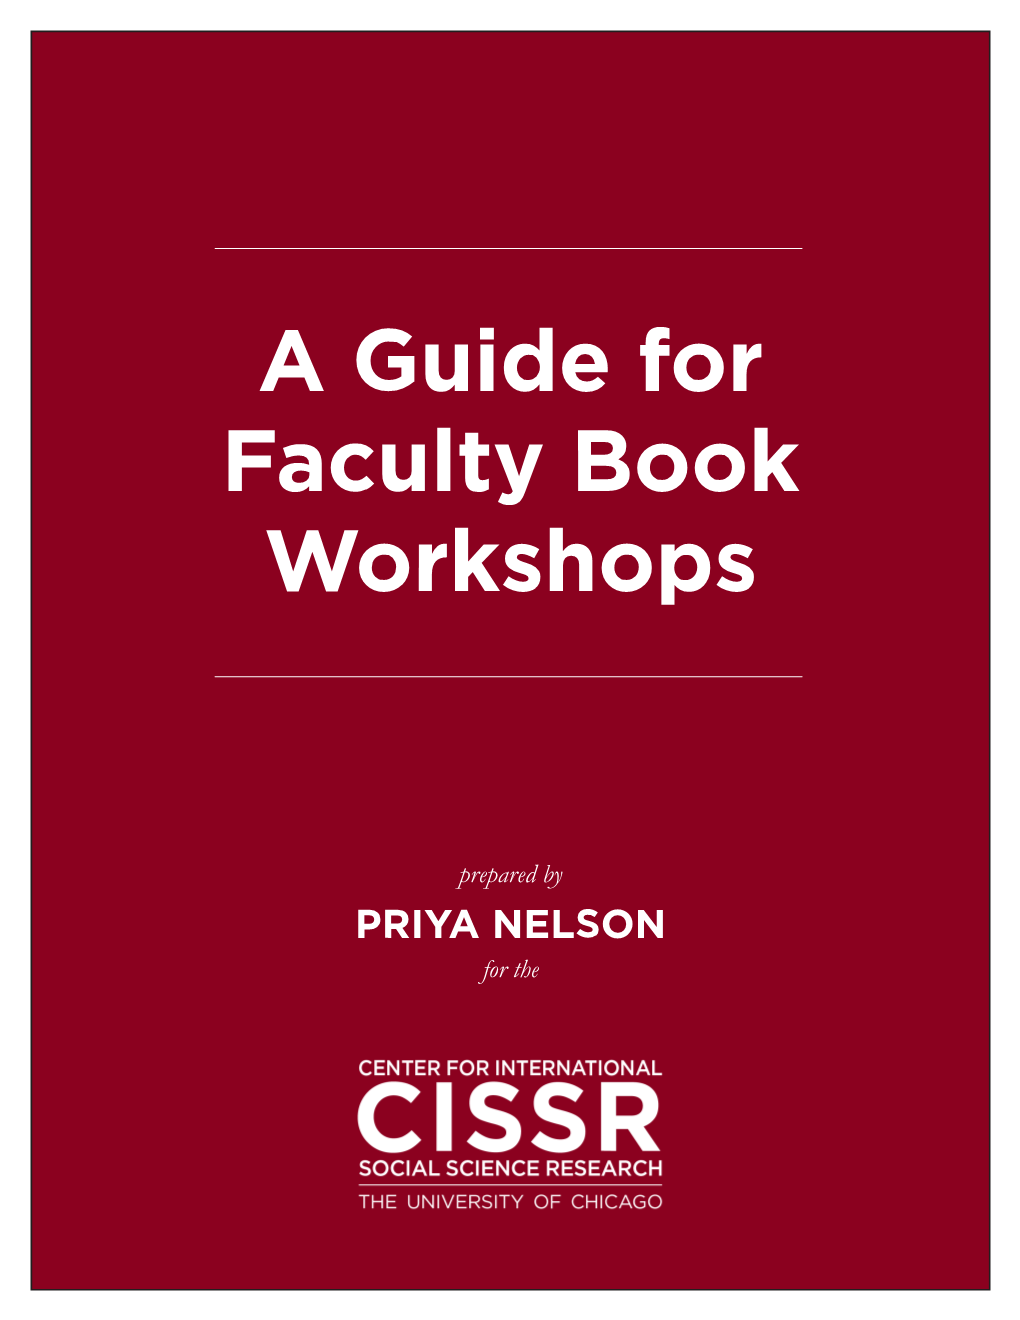 A Guide for Faculty Book Workshops